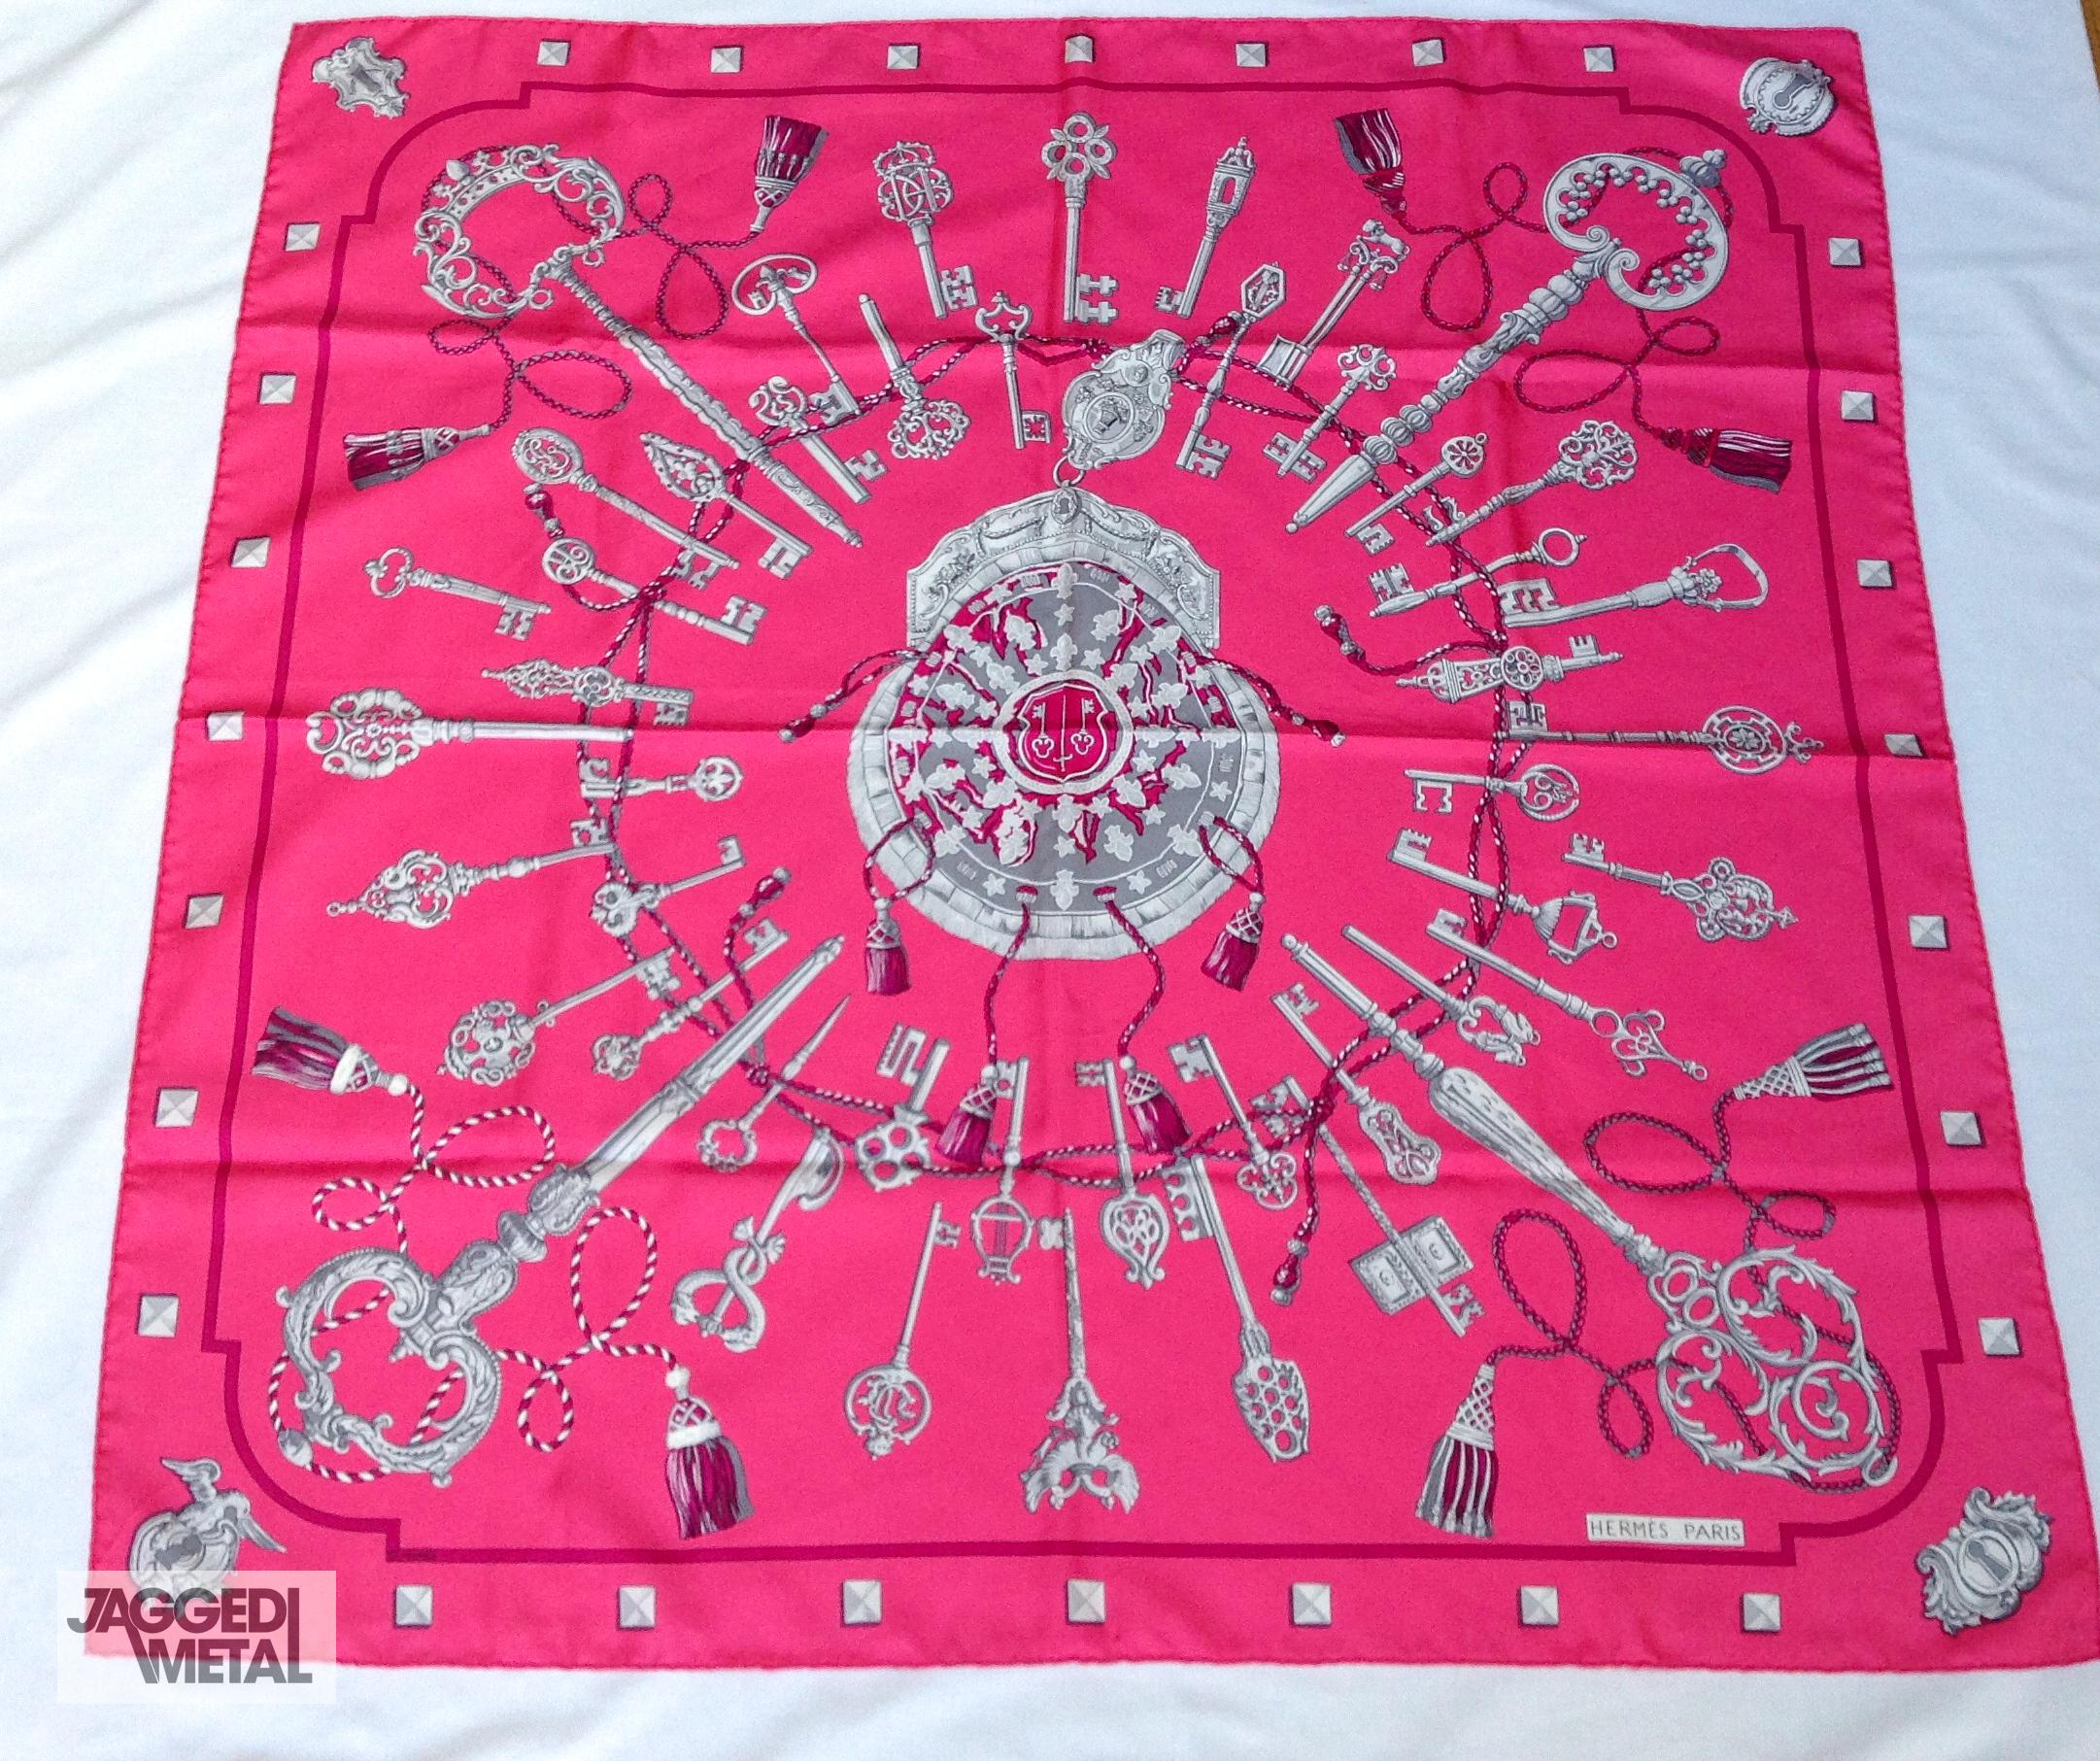 Vintage HERMÈS Silk Scarf Fuchsia LES CLÉS 90cm CATY LATHAM 

This iconic Hermes scarf was first issued in 1965 and due to its overwhelming popularity has been reissued numerous times. 

This colourway is a stunning fuchsia pink with grey/silver